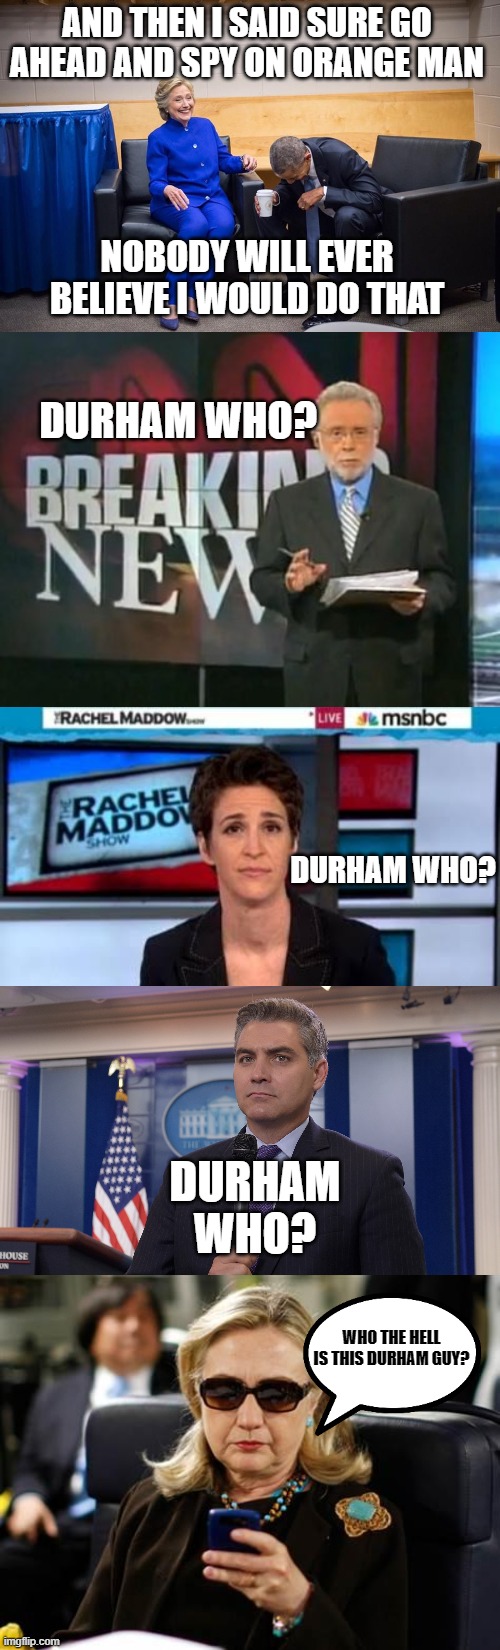 MSM PLAYING STUPID AGAIN | AND THEN I SAID SURE GO AHEAD AND SPY ON ORANGE MAN; DURHAM WHO? NOBODY WILL EVER BELIEVE I WOULD DO THAT; DURHAM WHO? DURHAM WHO? WHO THE HELL IS THIS DURHAM GUY? | image tagged in hillary obama laugh,cnn breaking news,msnbc news,jim acosta nbc,memes,hillary clinton cellphone | made w/ Imgflip meme maker